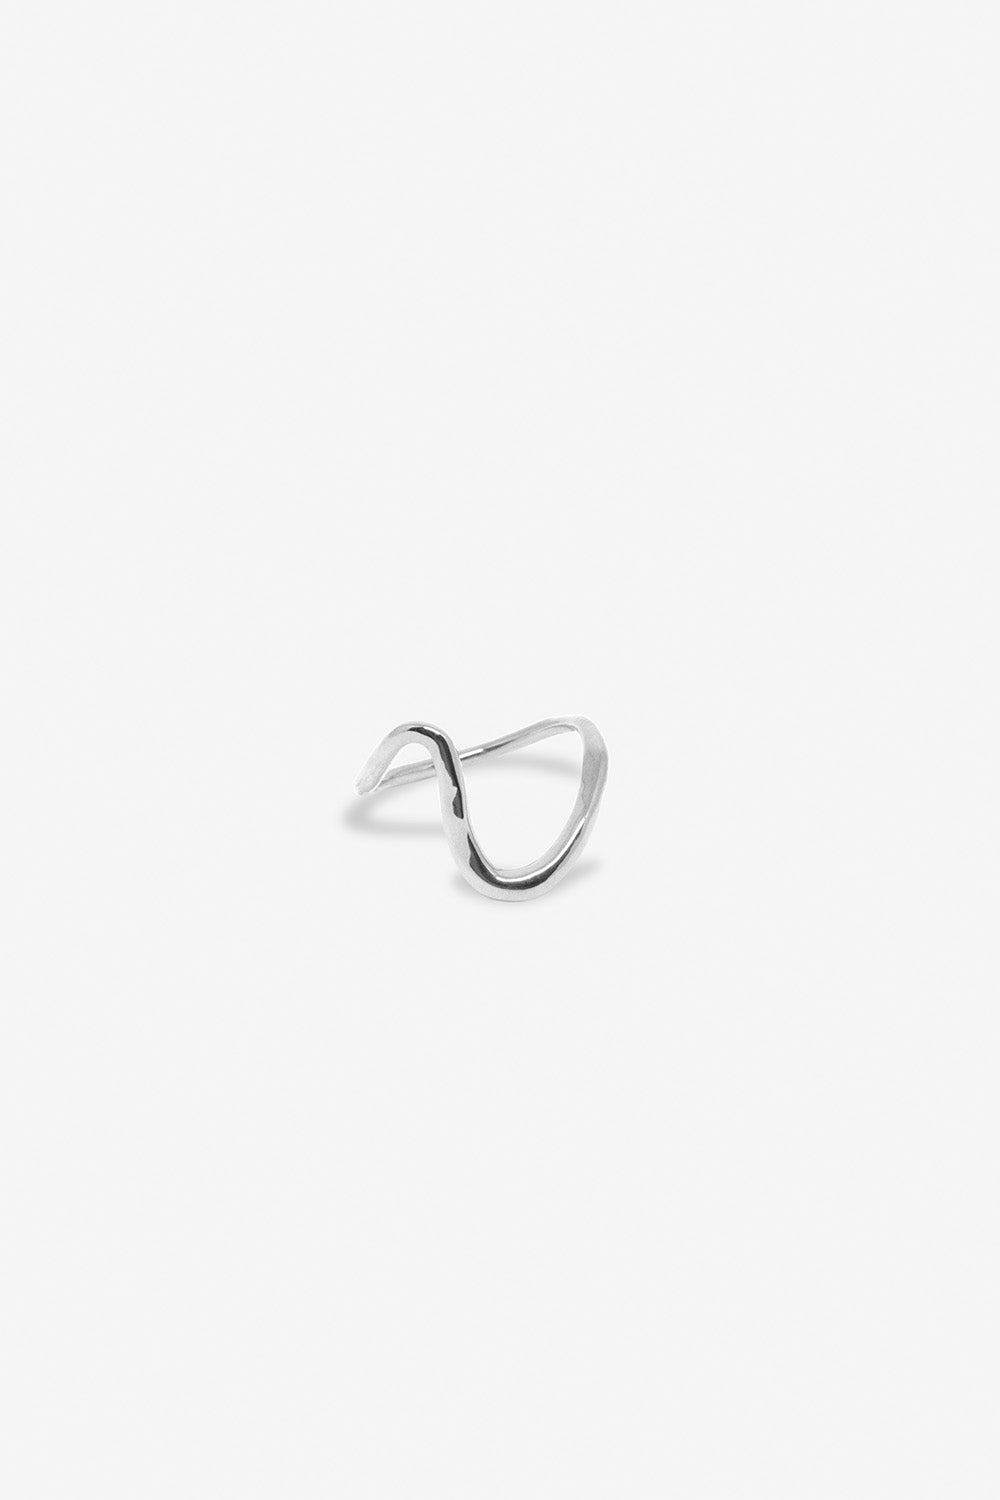 Swirl Ring - Small - Sterling Silver